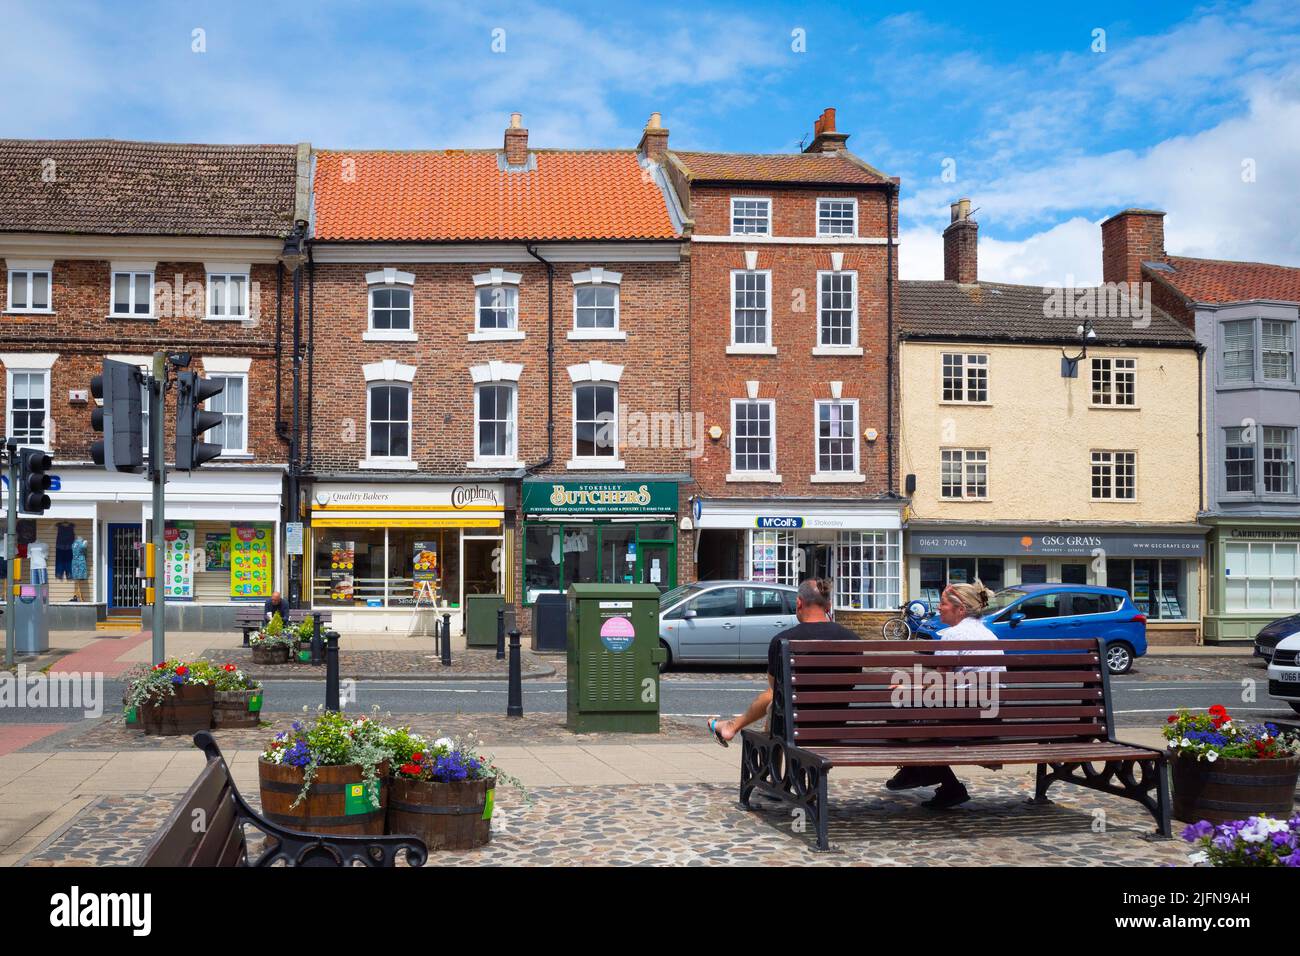 The High Street of the market town of Stokesley North Yorkshire on a sunny summer day with a couple seated on a bench near the road crossing Stock Photo